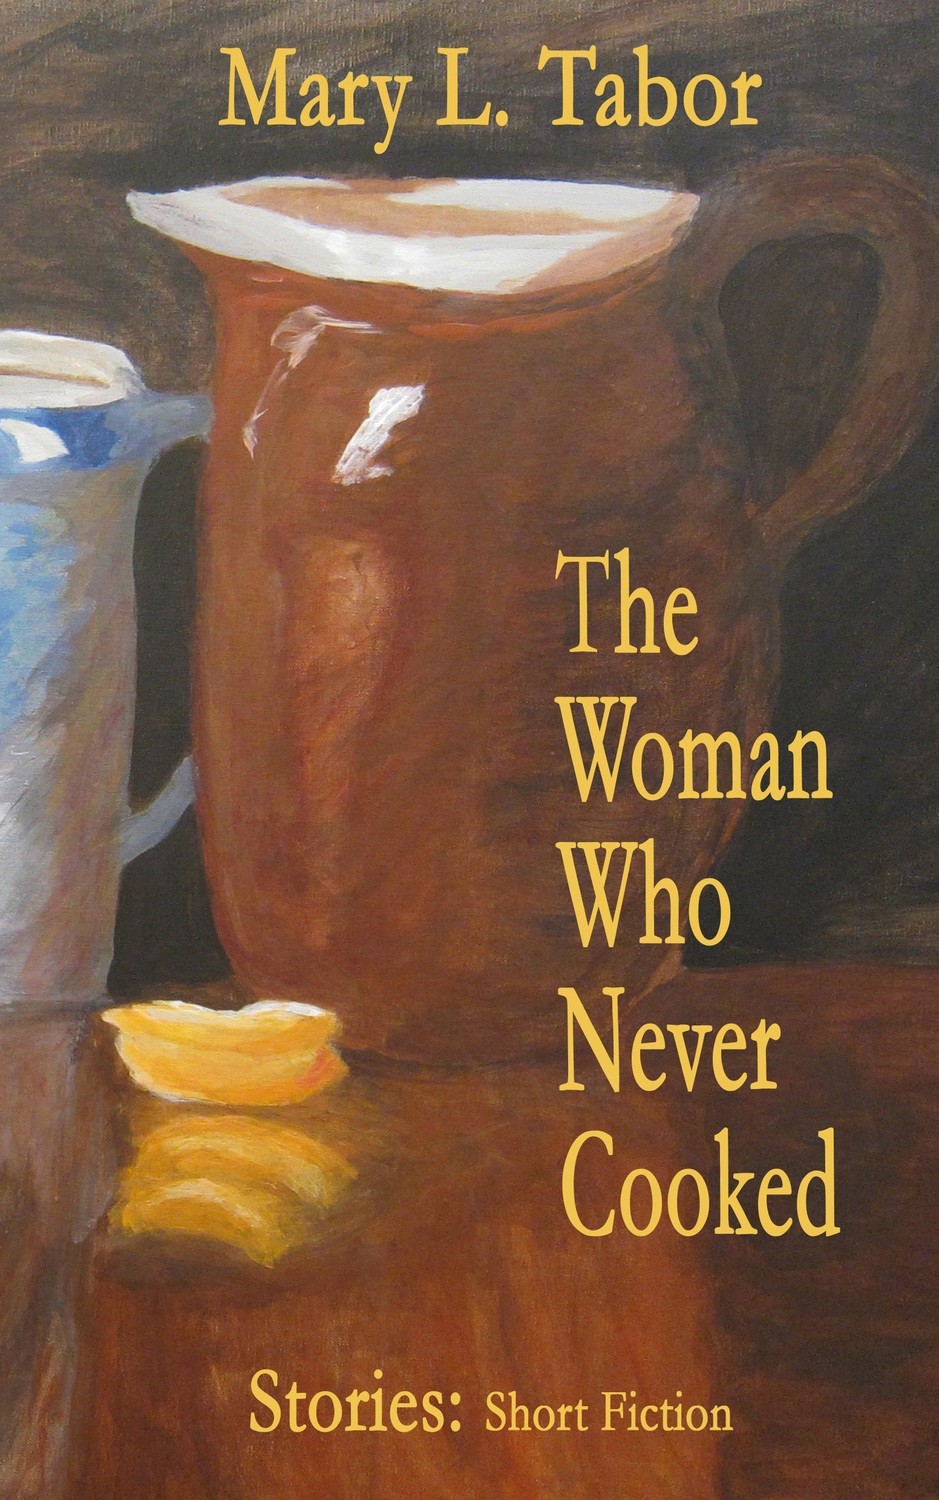 Explore the life of The Woman Who Never Cooked